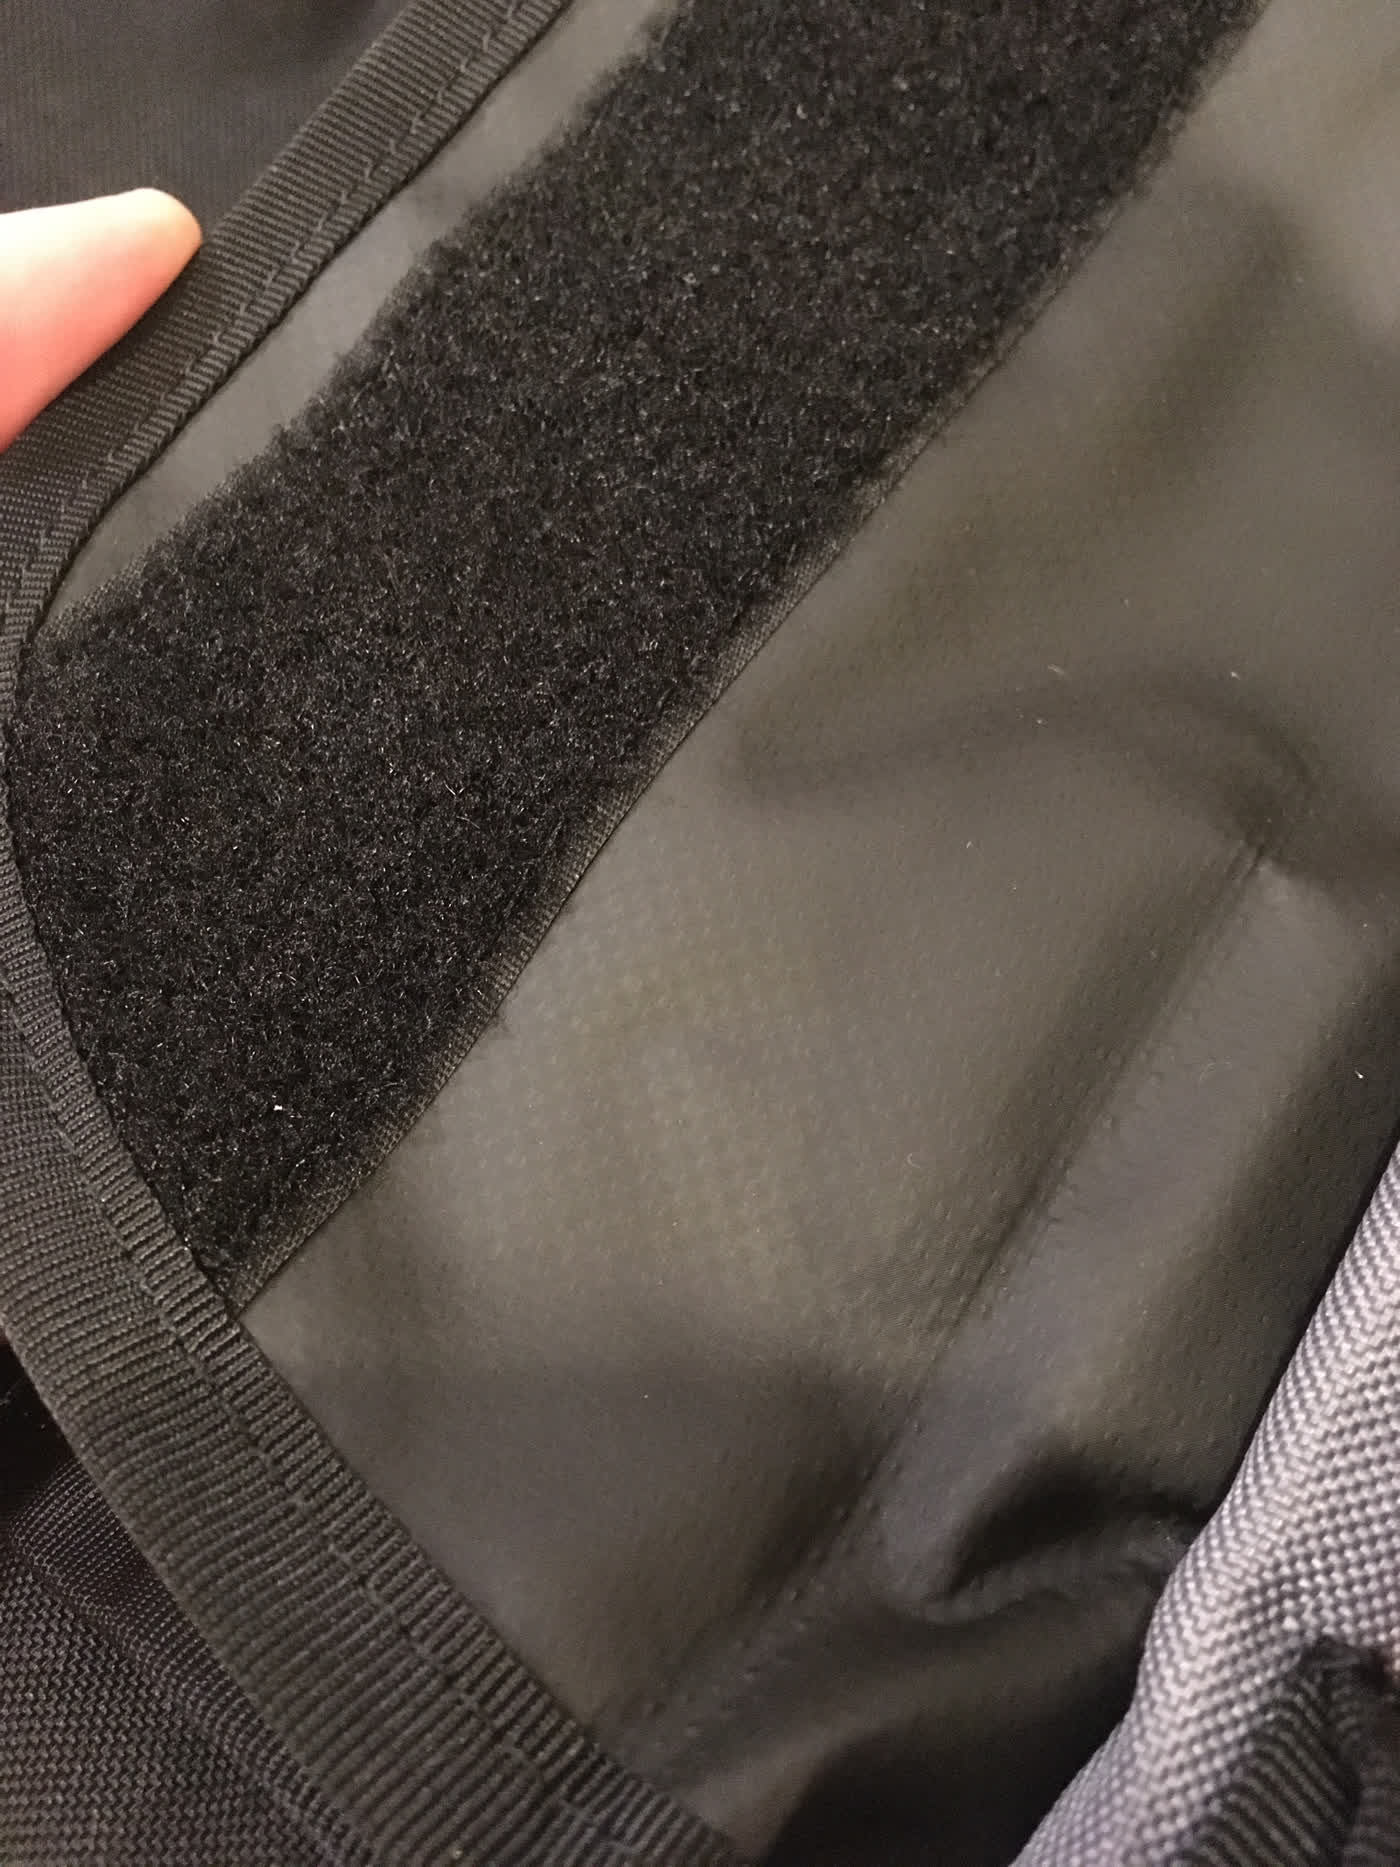 Waterproof (?) or at least, water resistant, lid for laptop compartment